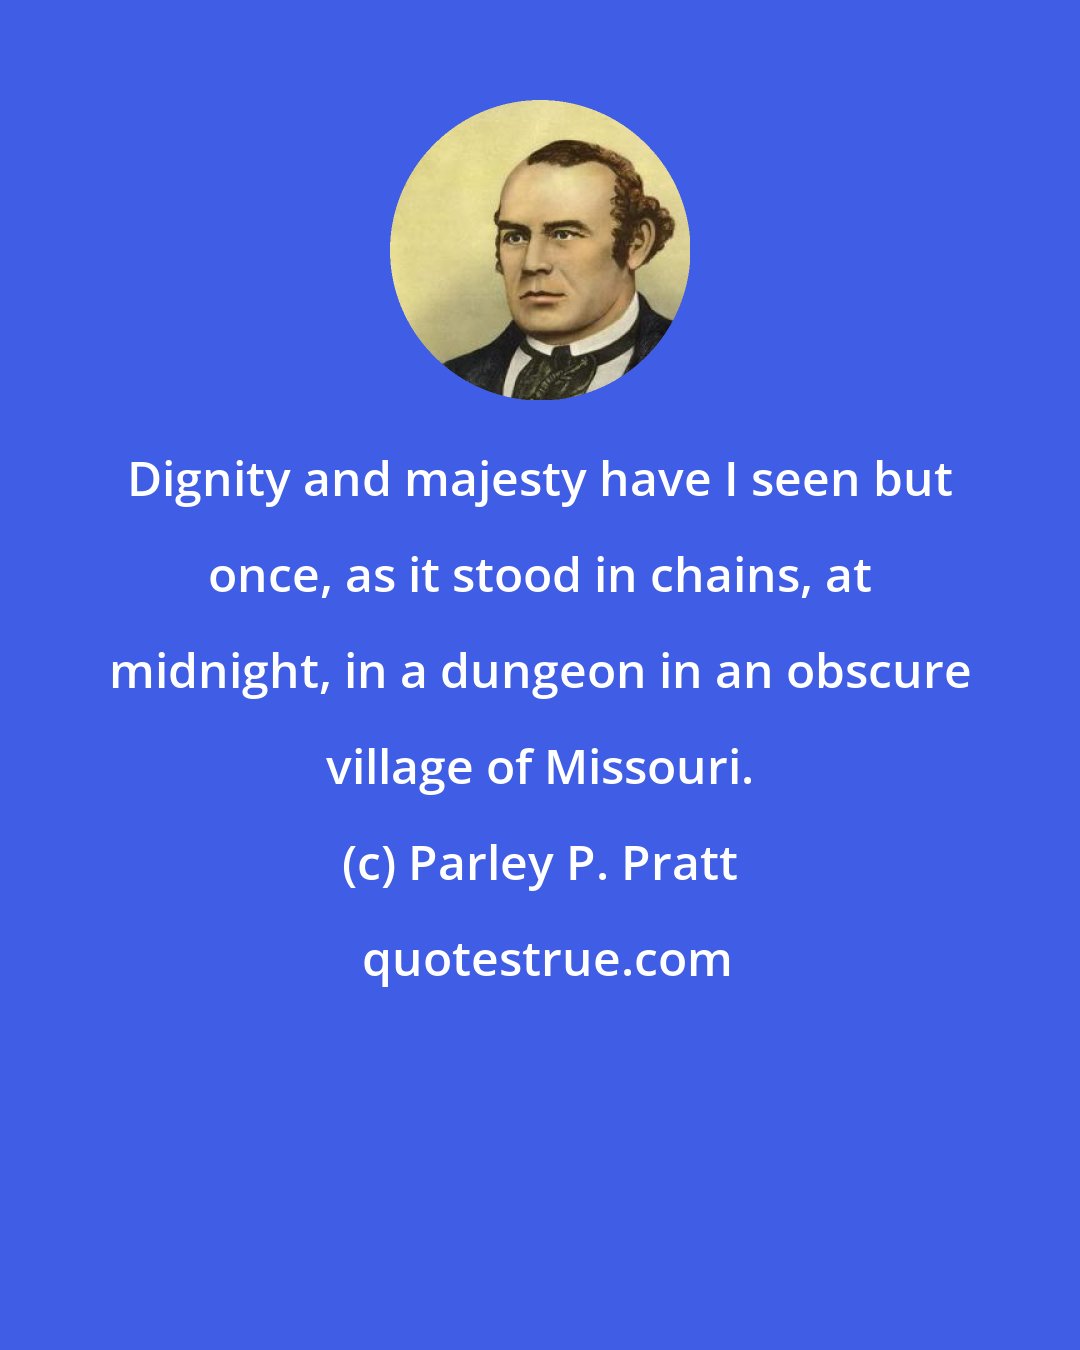 Parley P. Pratt: Dignity and majesty have I seen but once, as it stood in chains, at midnight, in a dungeon in an obscure village of Missouri.